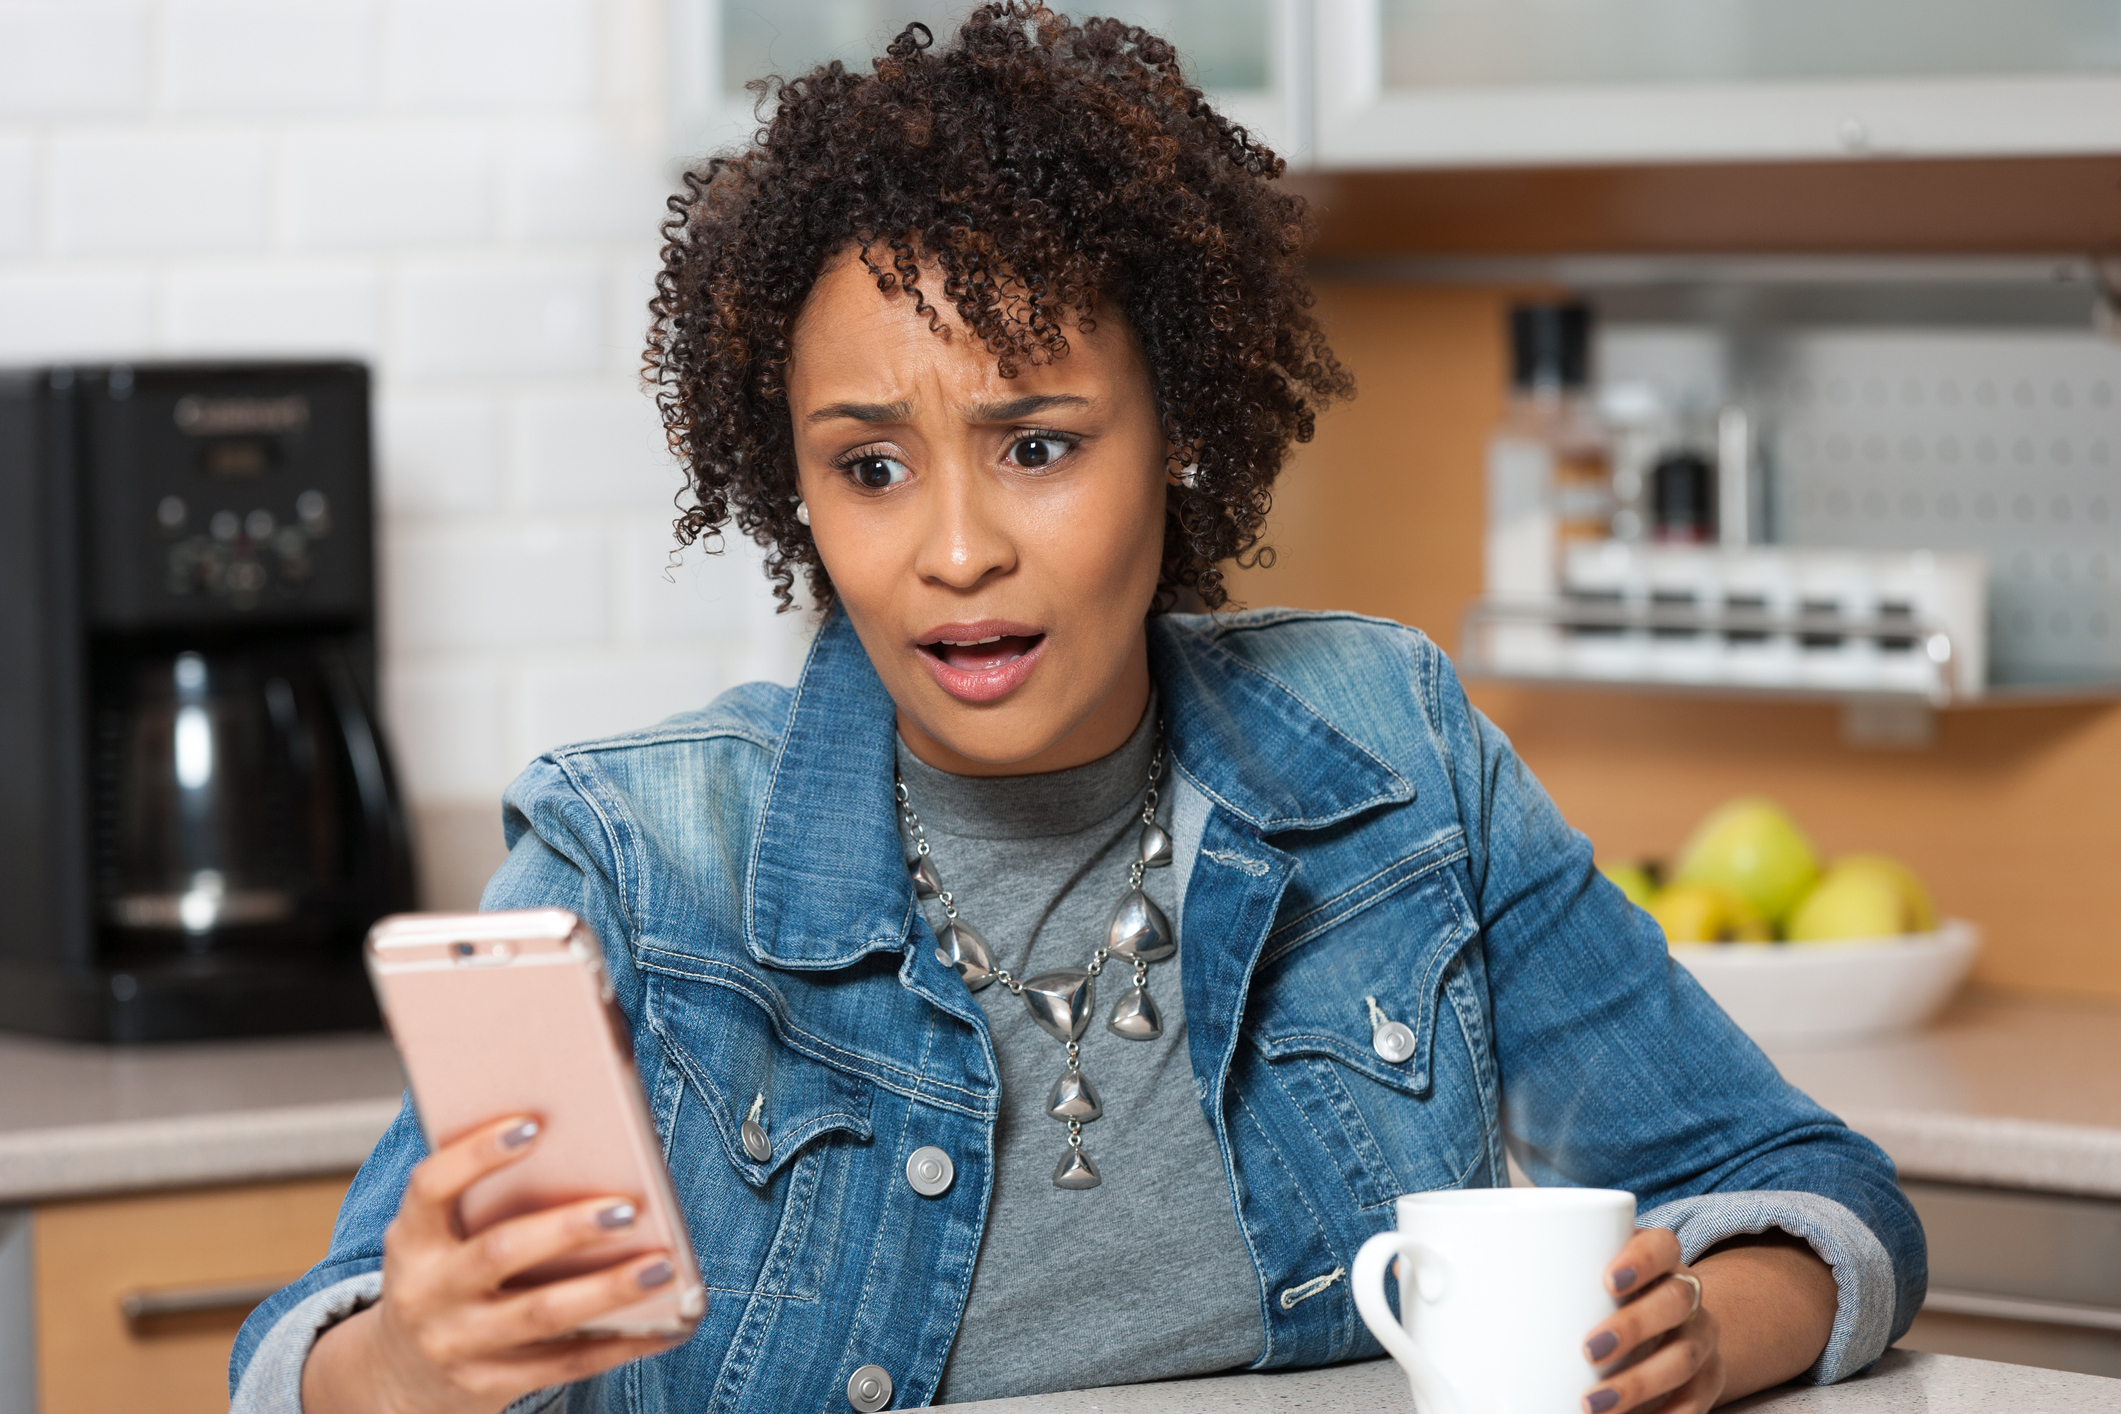 Young African American woman on mobile phone with shocked look on her face, sitting in kitchen